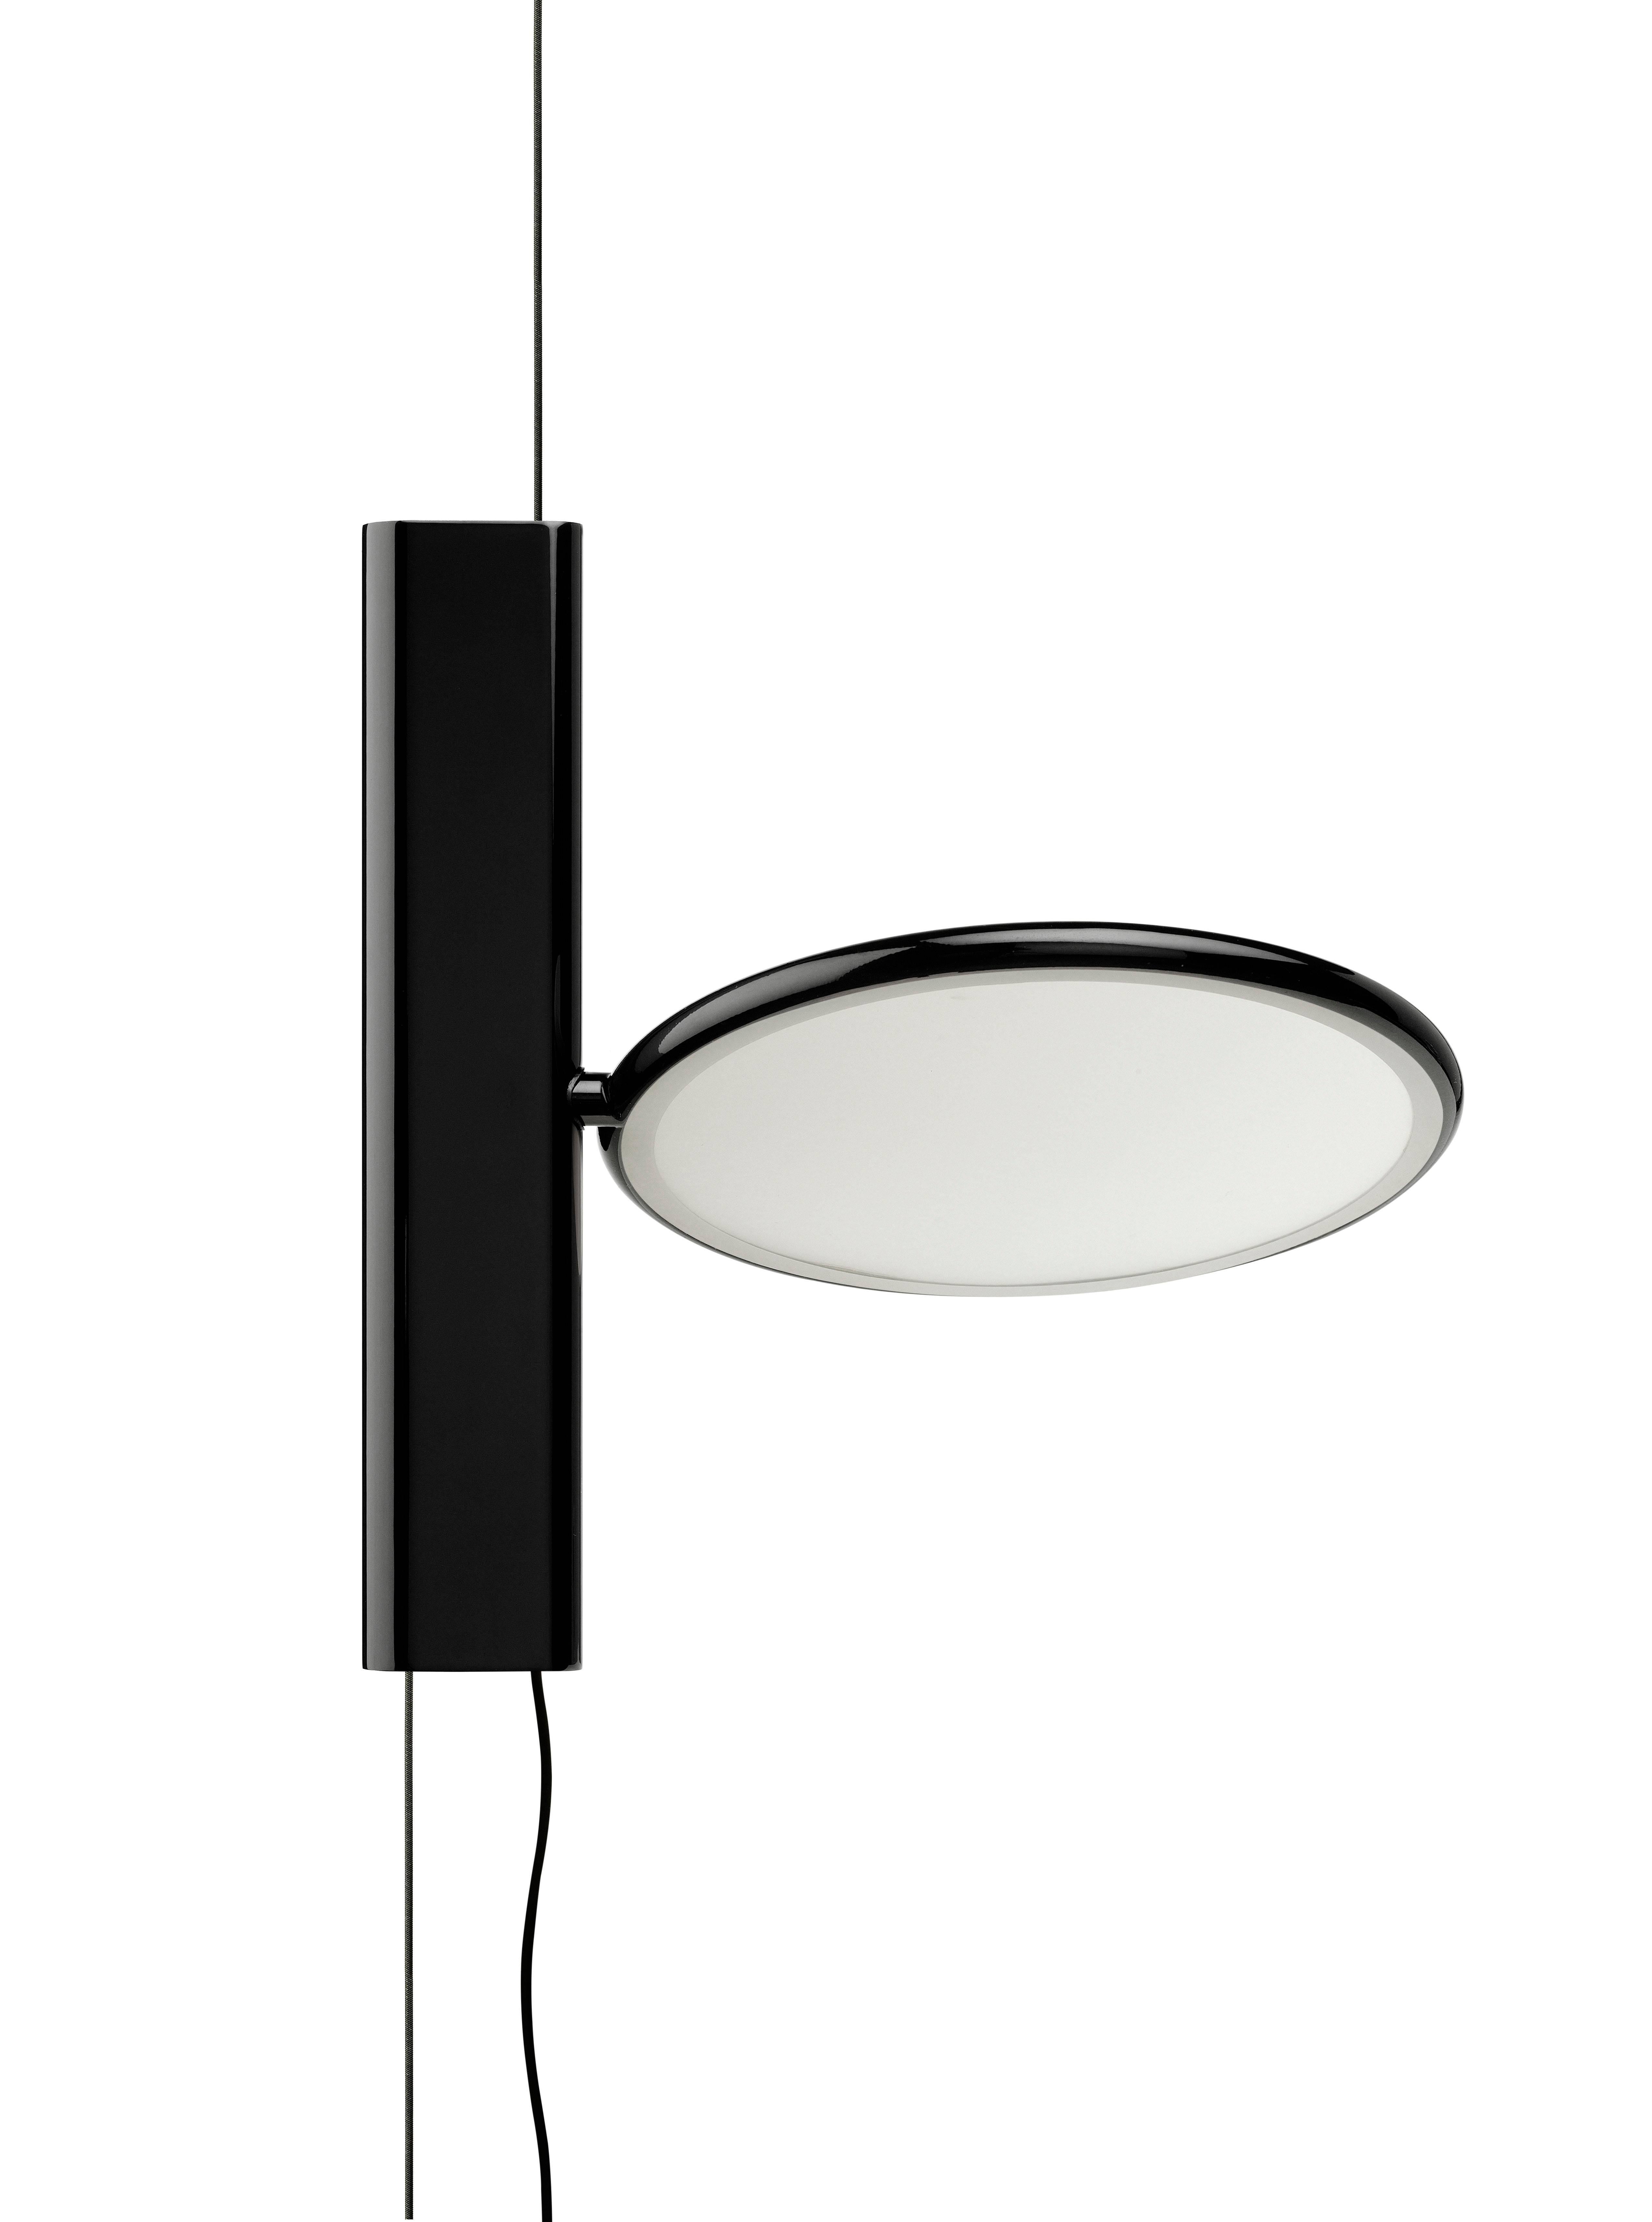 A pendant light that feels as at home in an industrial space as it would in museum exhibit: The OK Light plays with expectations to provide functional light that is surprising and easily directed. It features an ultra-flat LED surface with